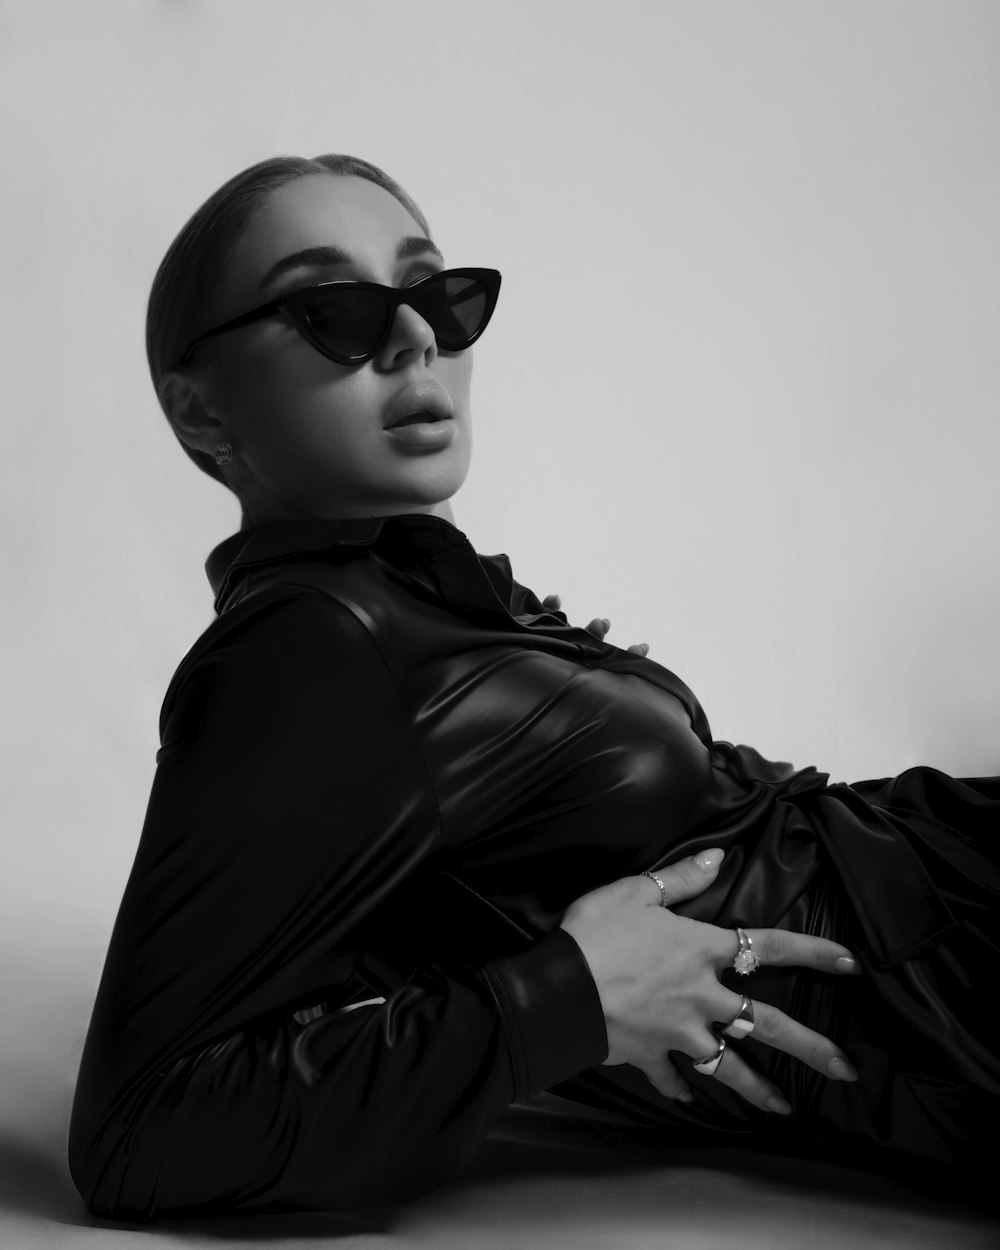 a woman in a black leather outfit and sunglasses